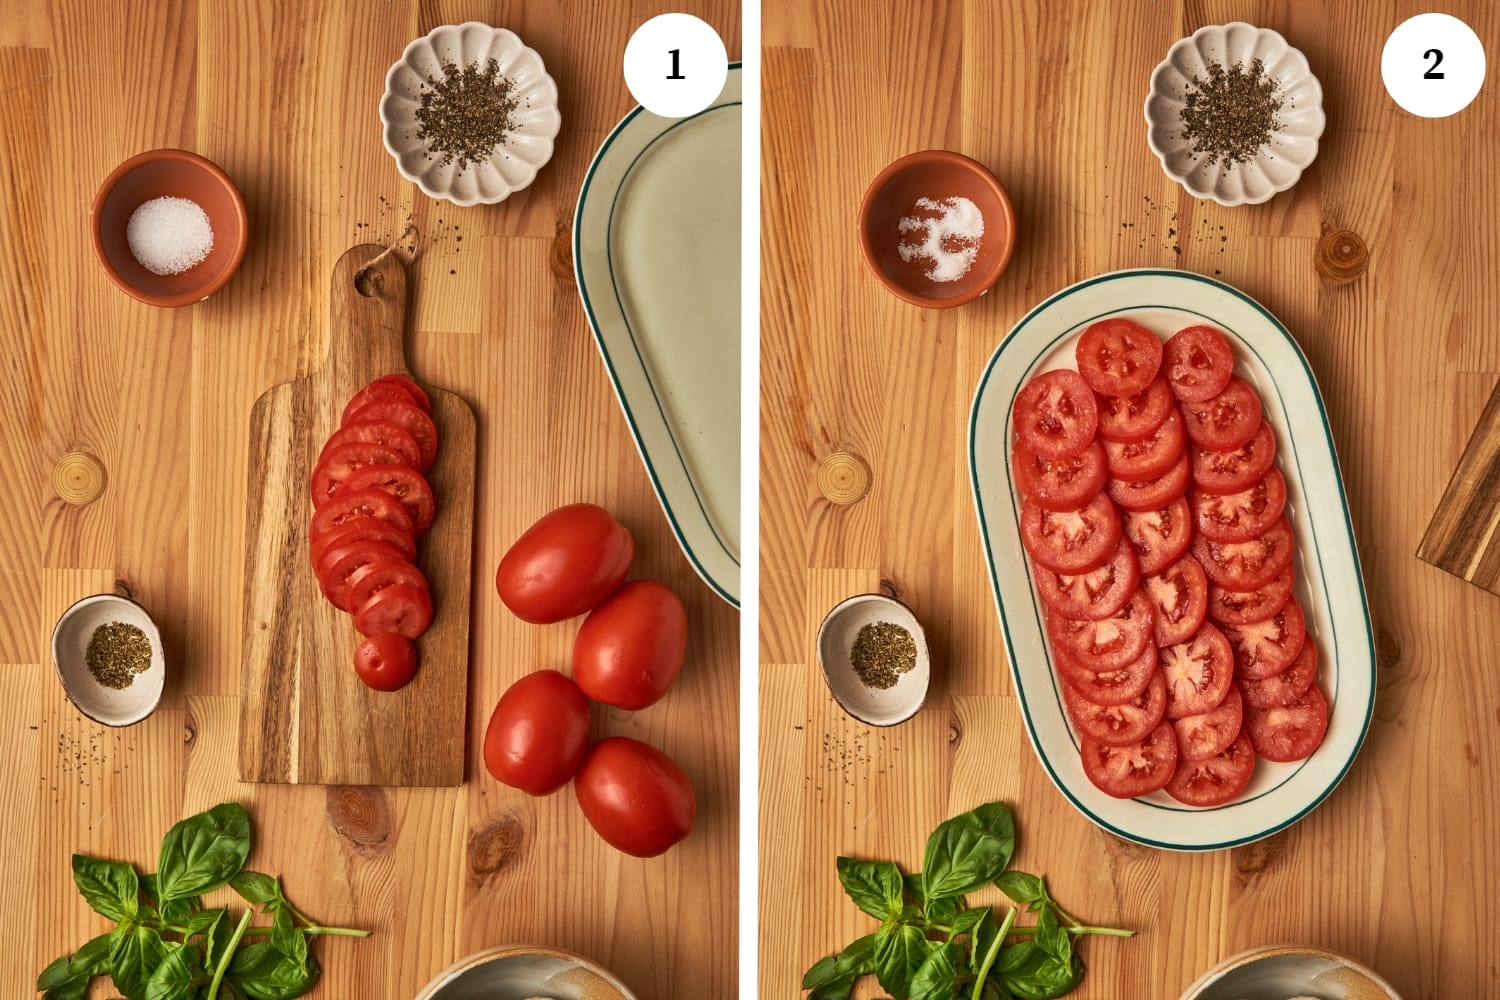 caprese salad procedure: sliced tomatoes on top of a wooden chopping board. other photo is arranged tomatoes on a white oval plate.